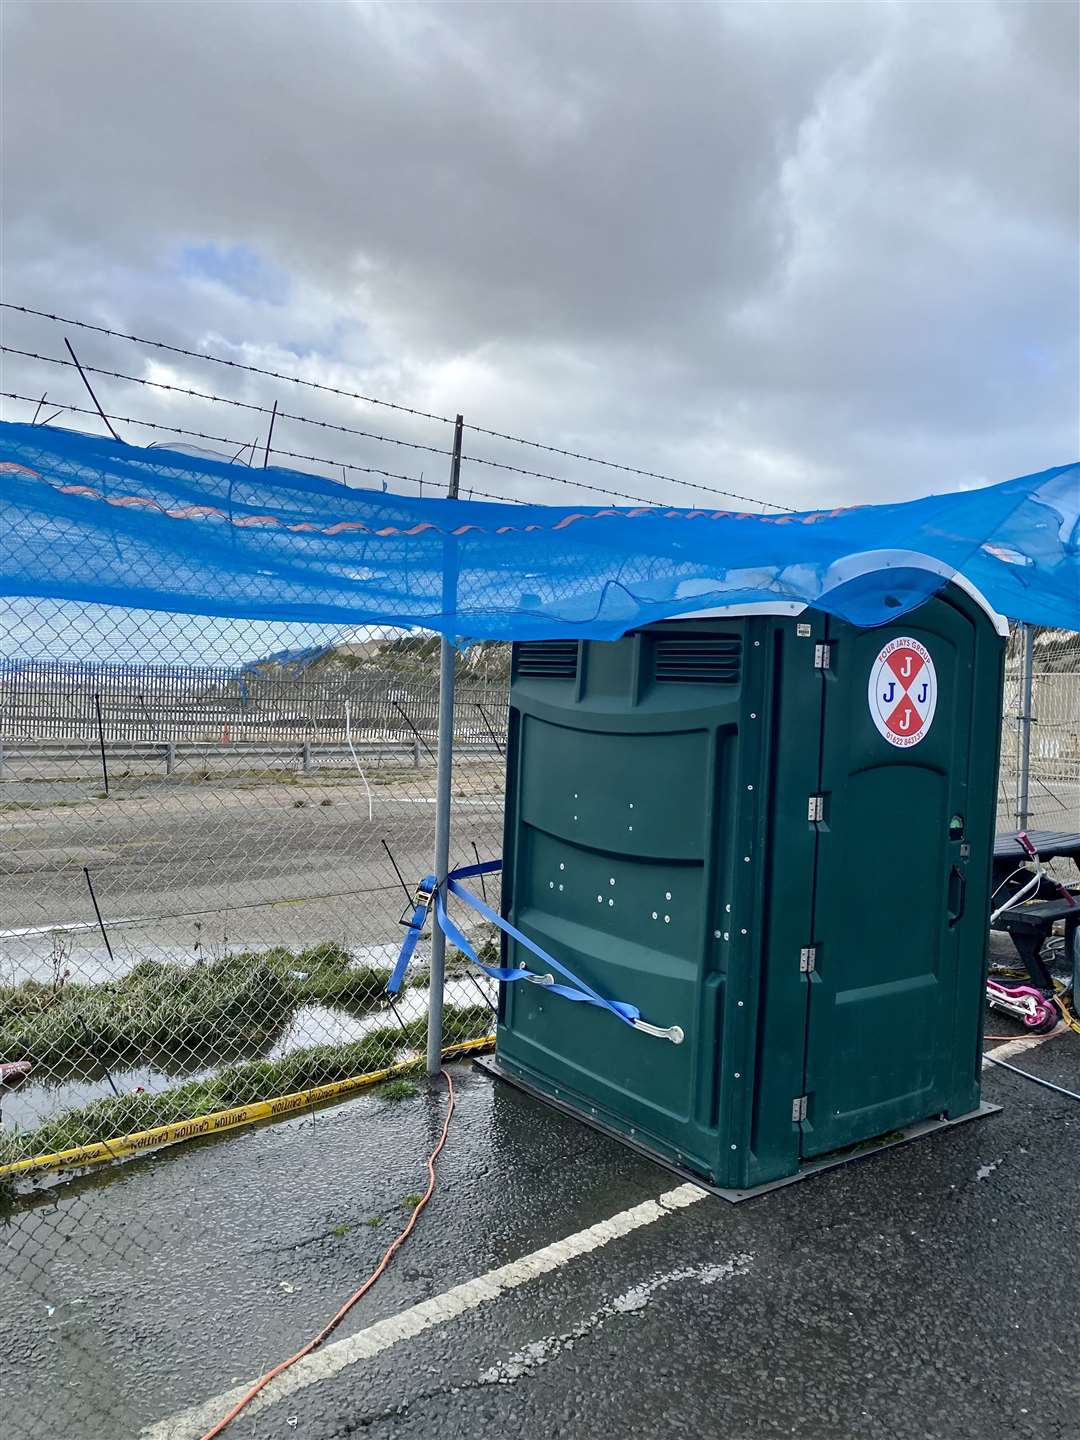 Families claim Portaloos are being left unemptied for weeks